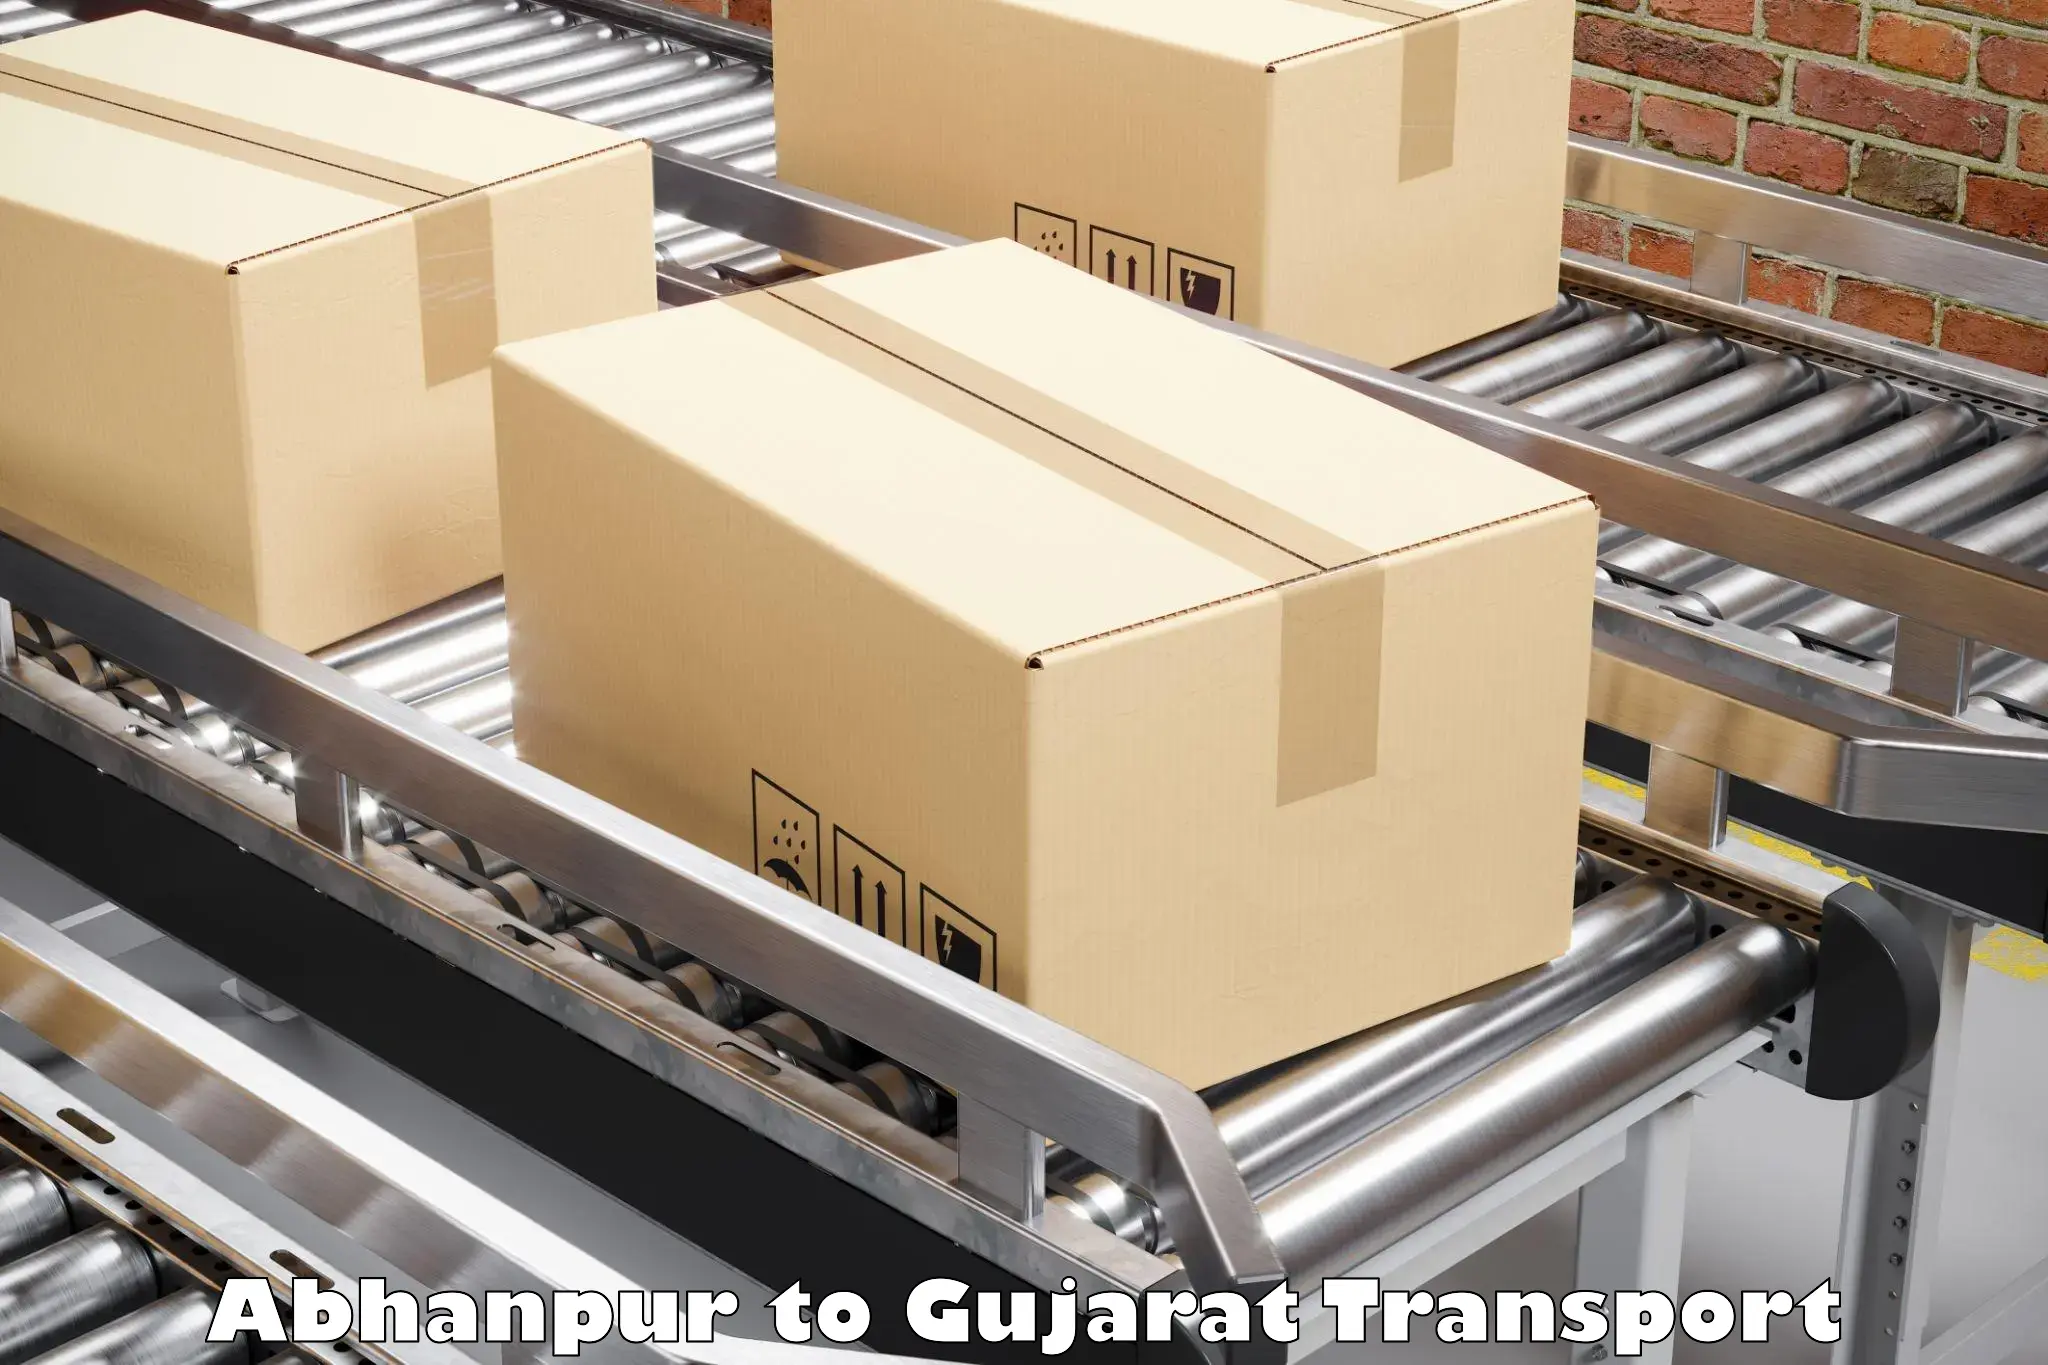 Package delivery services Abhanpur to Ahmedabad